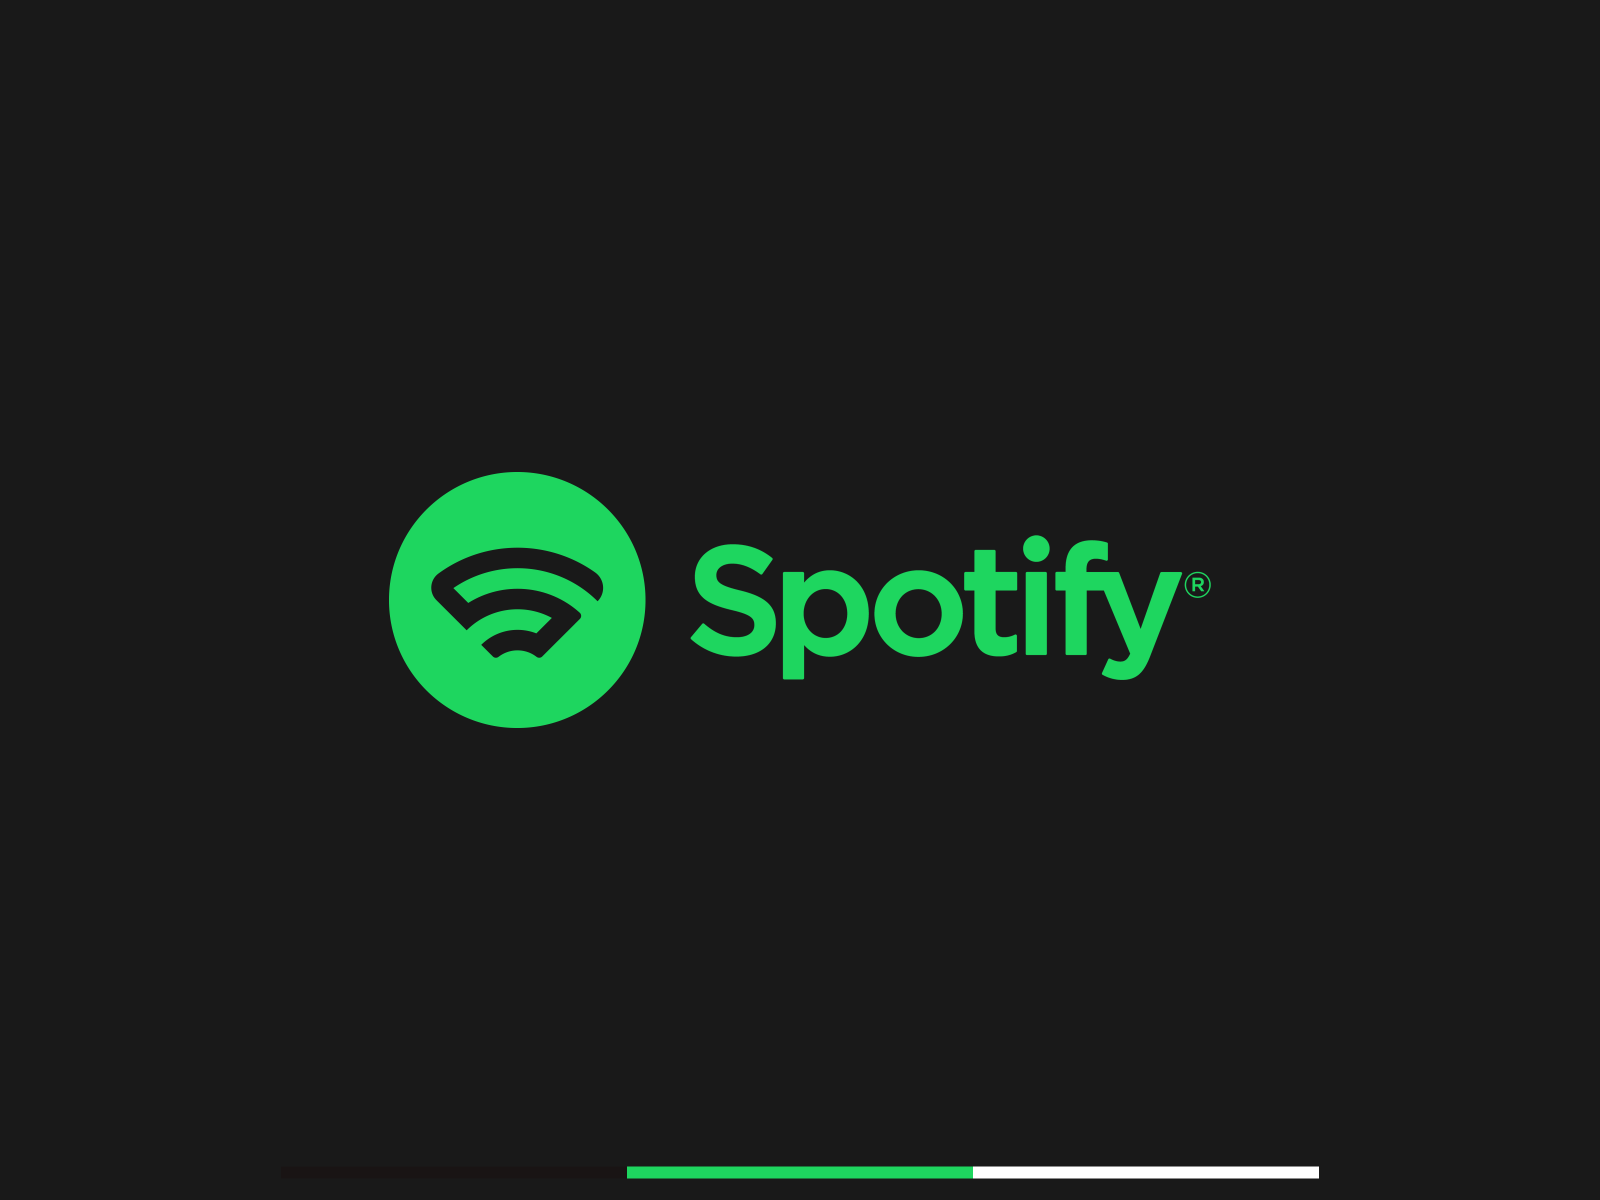 spotify online sign in